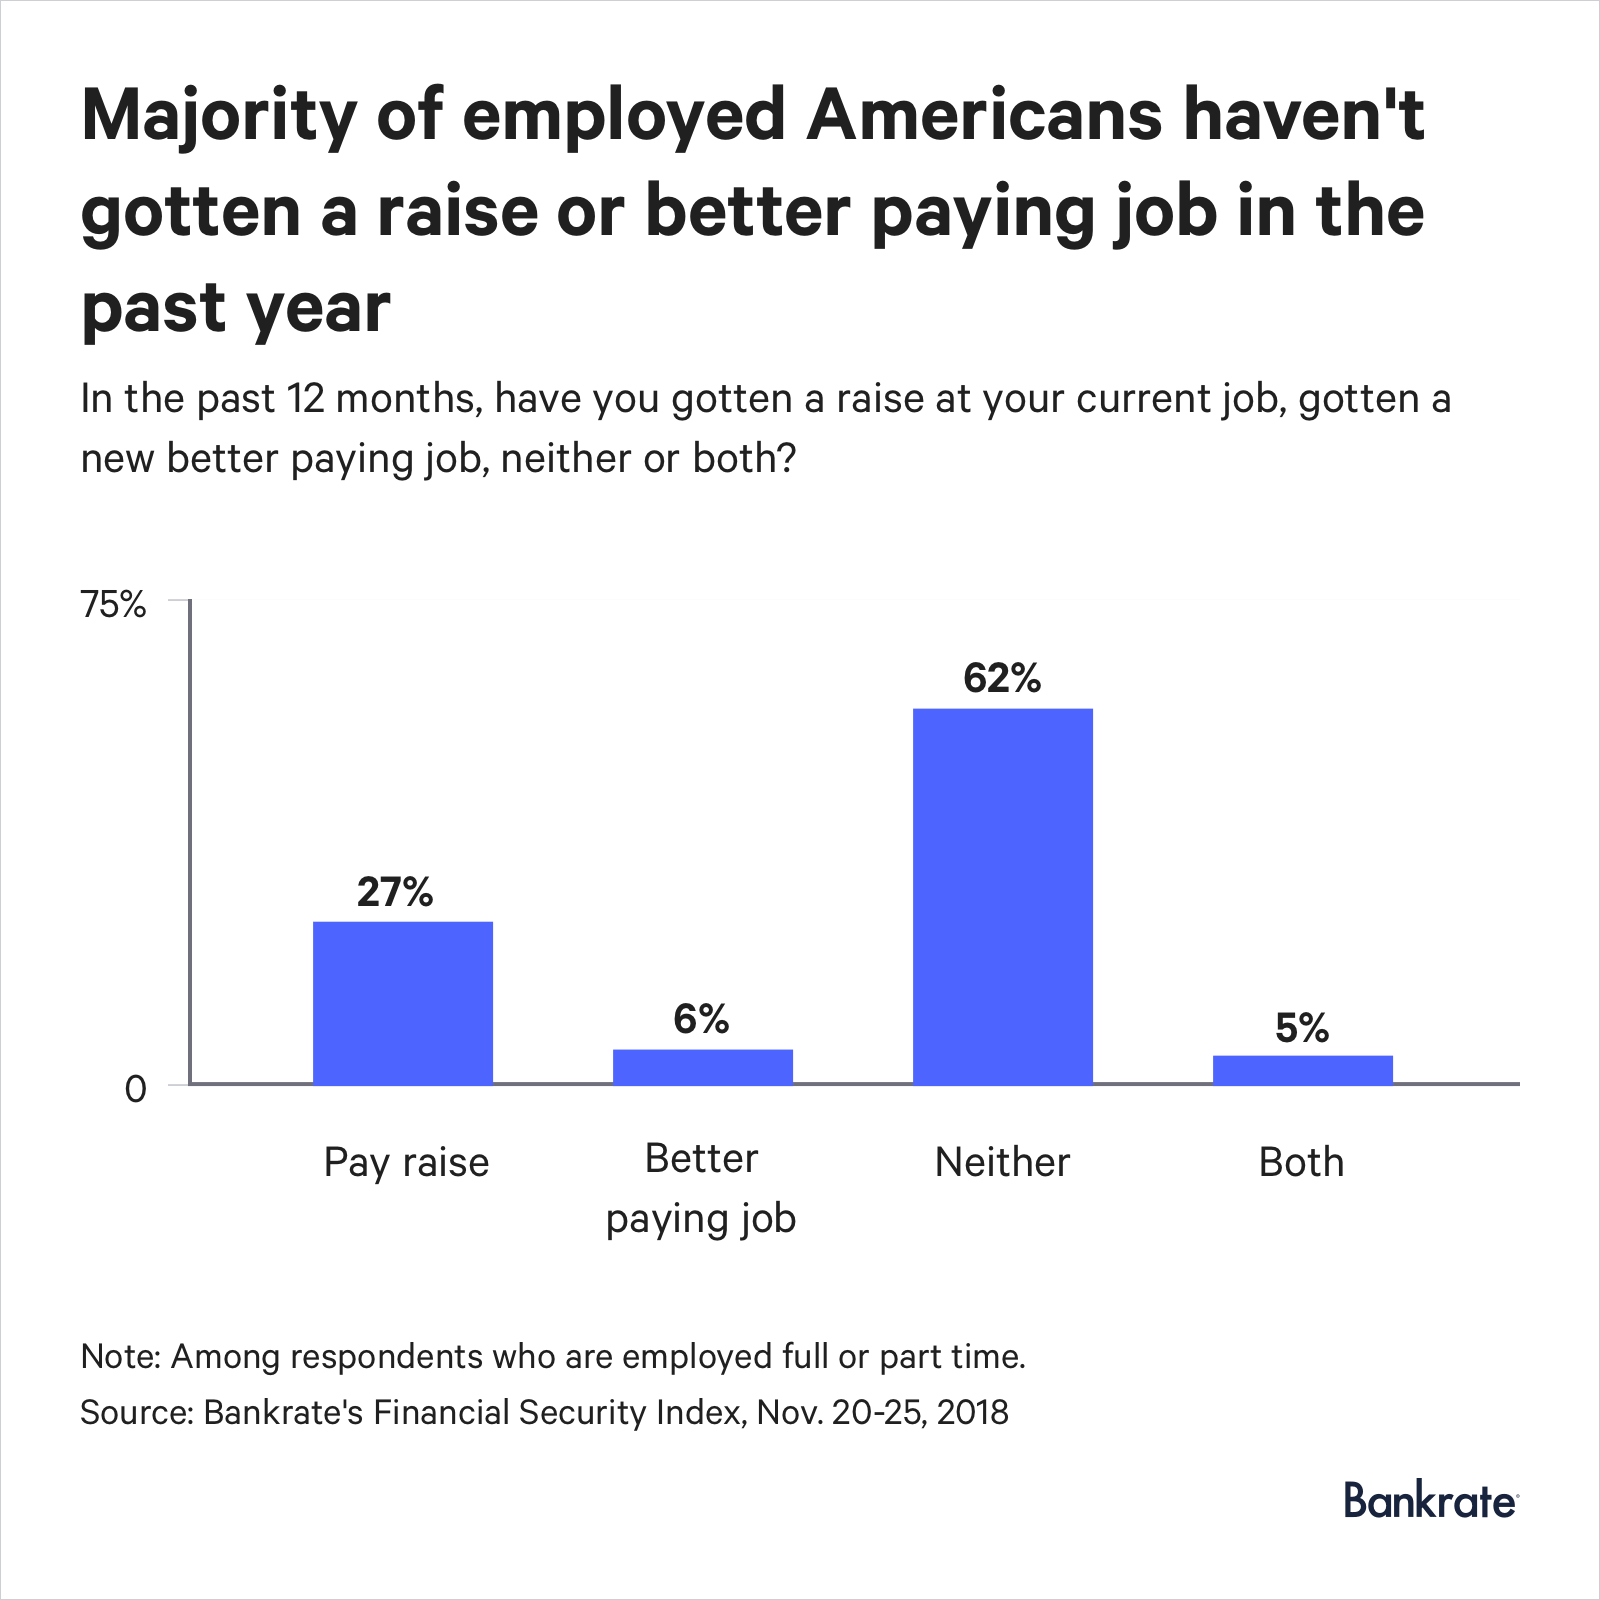 62% of Americans neither got a raise or a better paying job